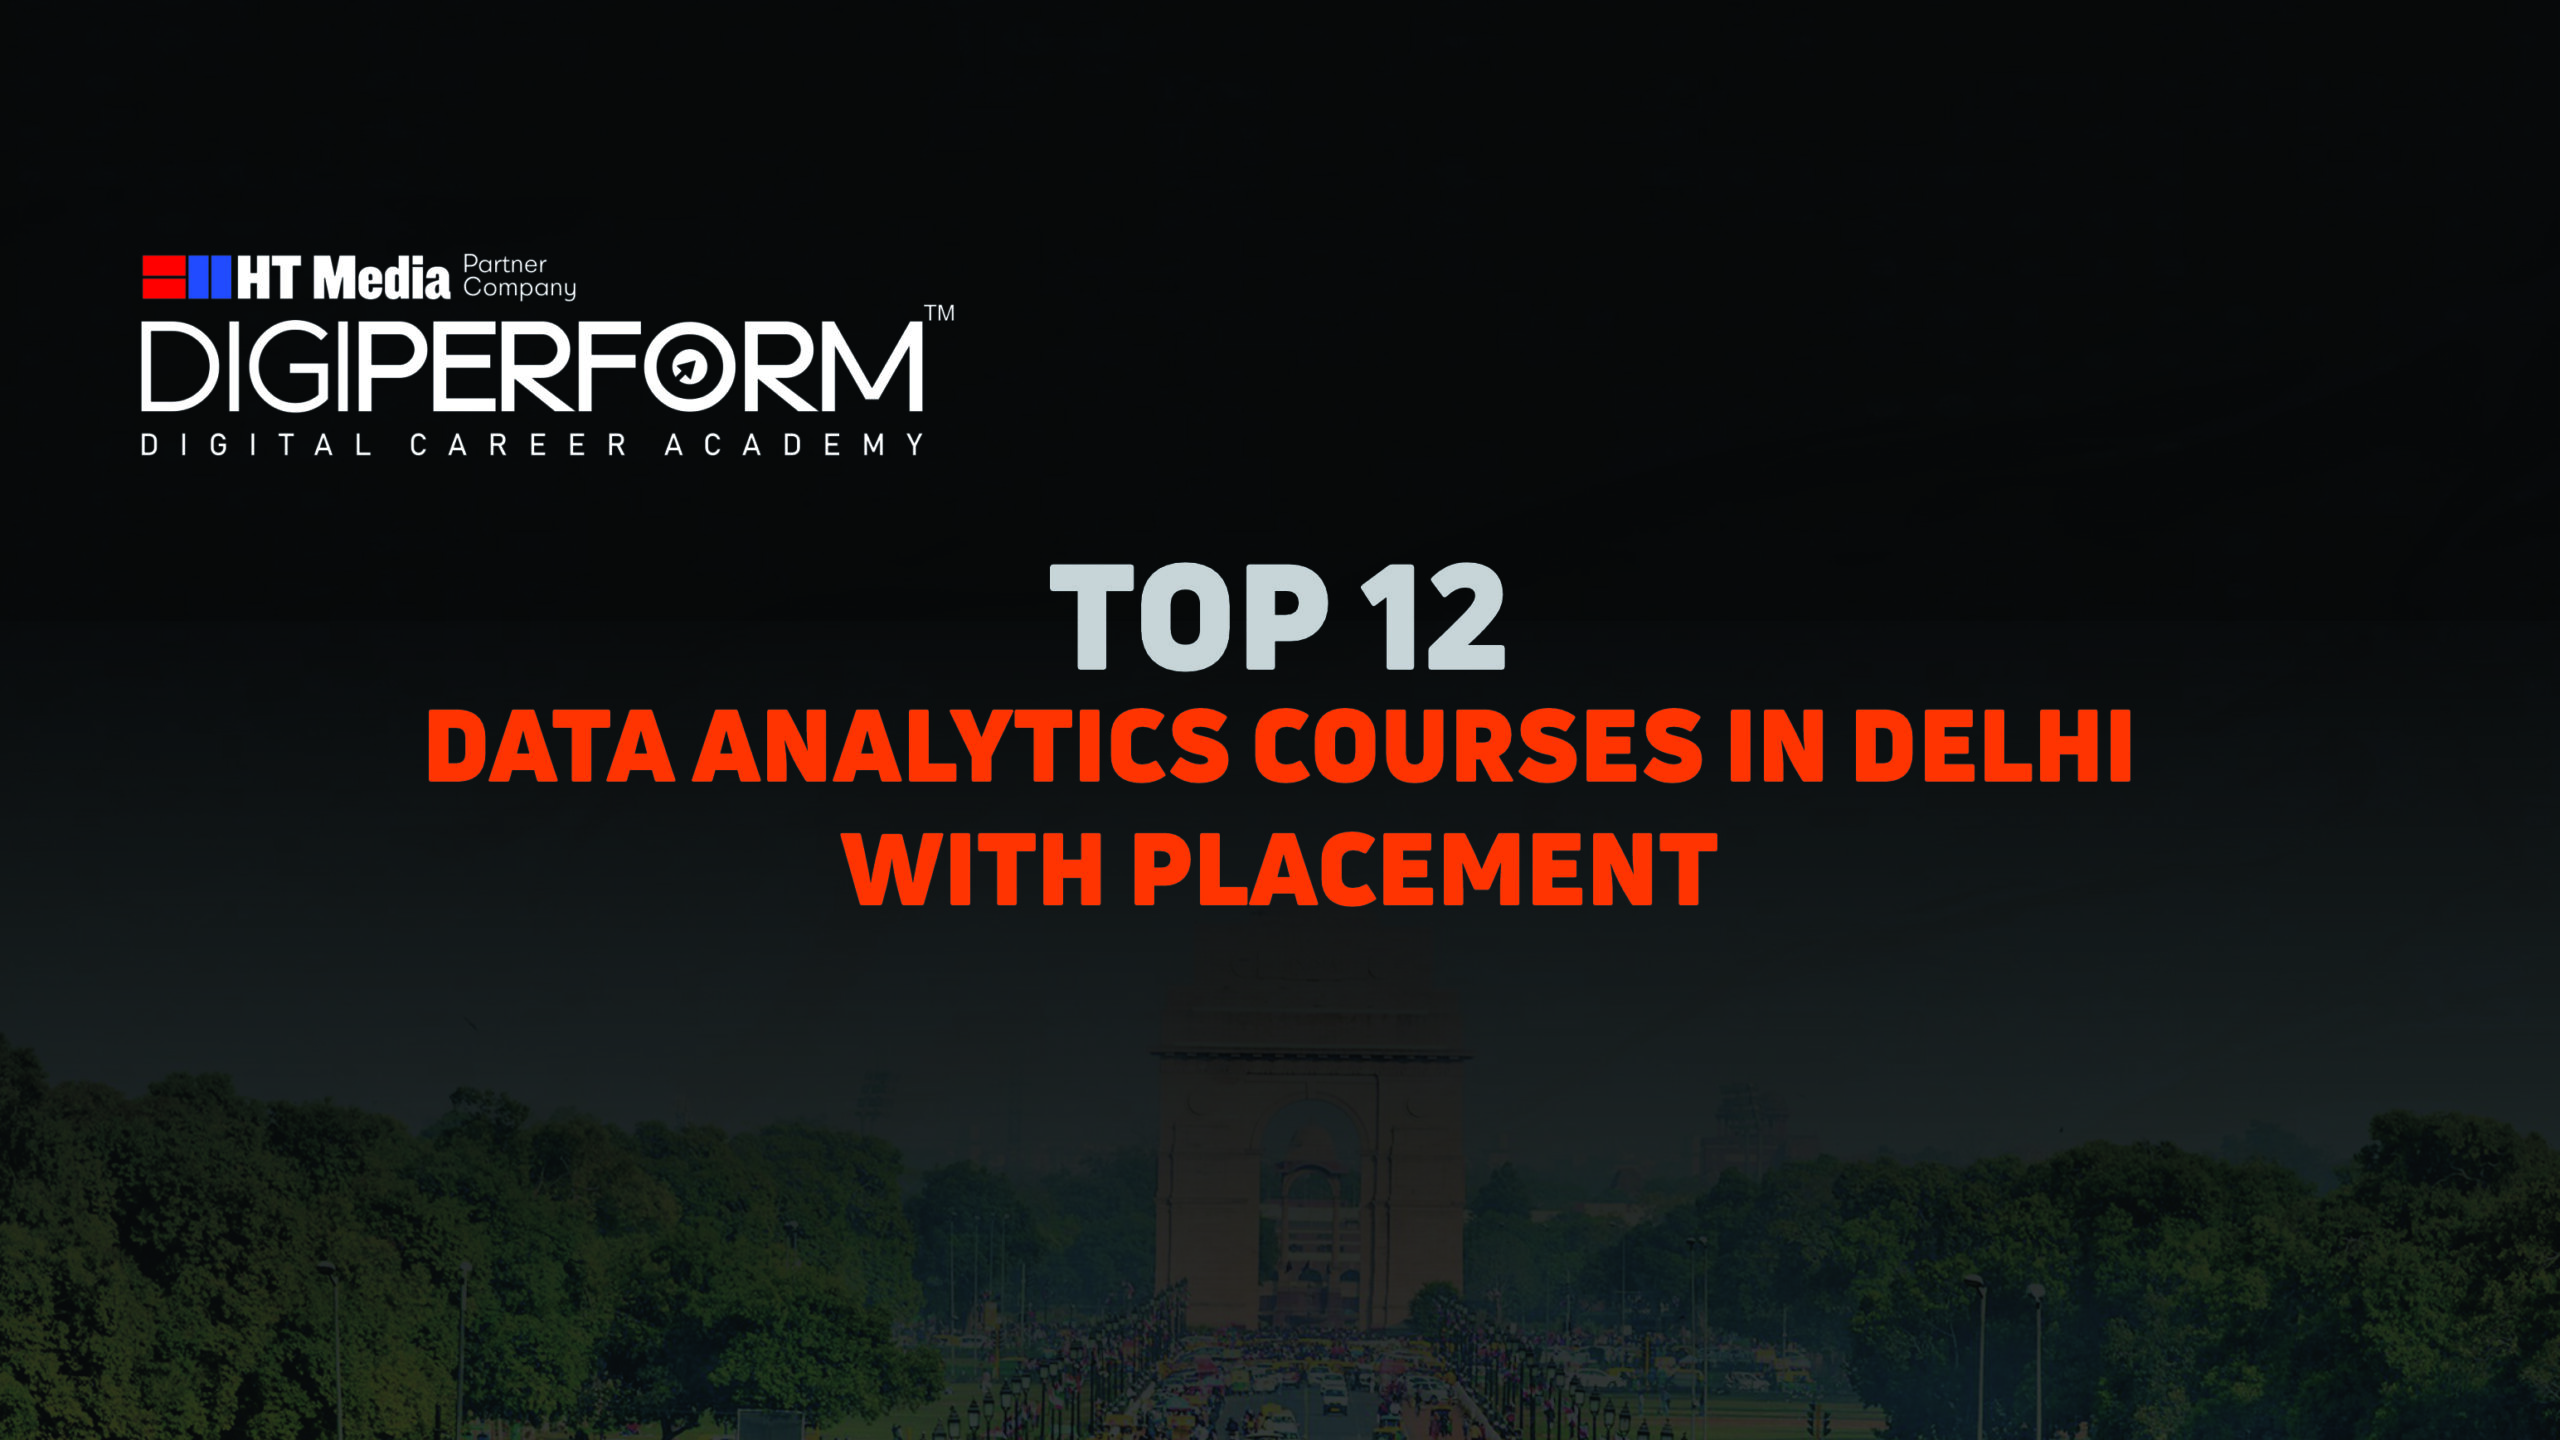 Top 12 Data Analytics Courses in Delhi with Placement